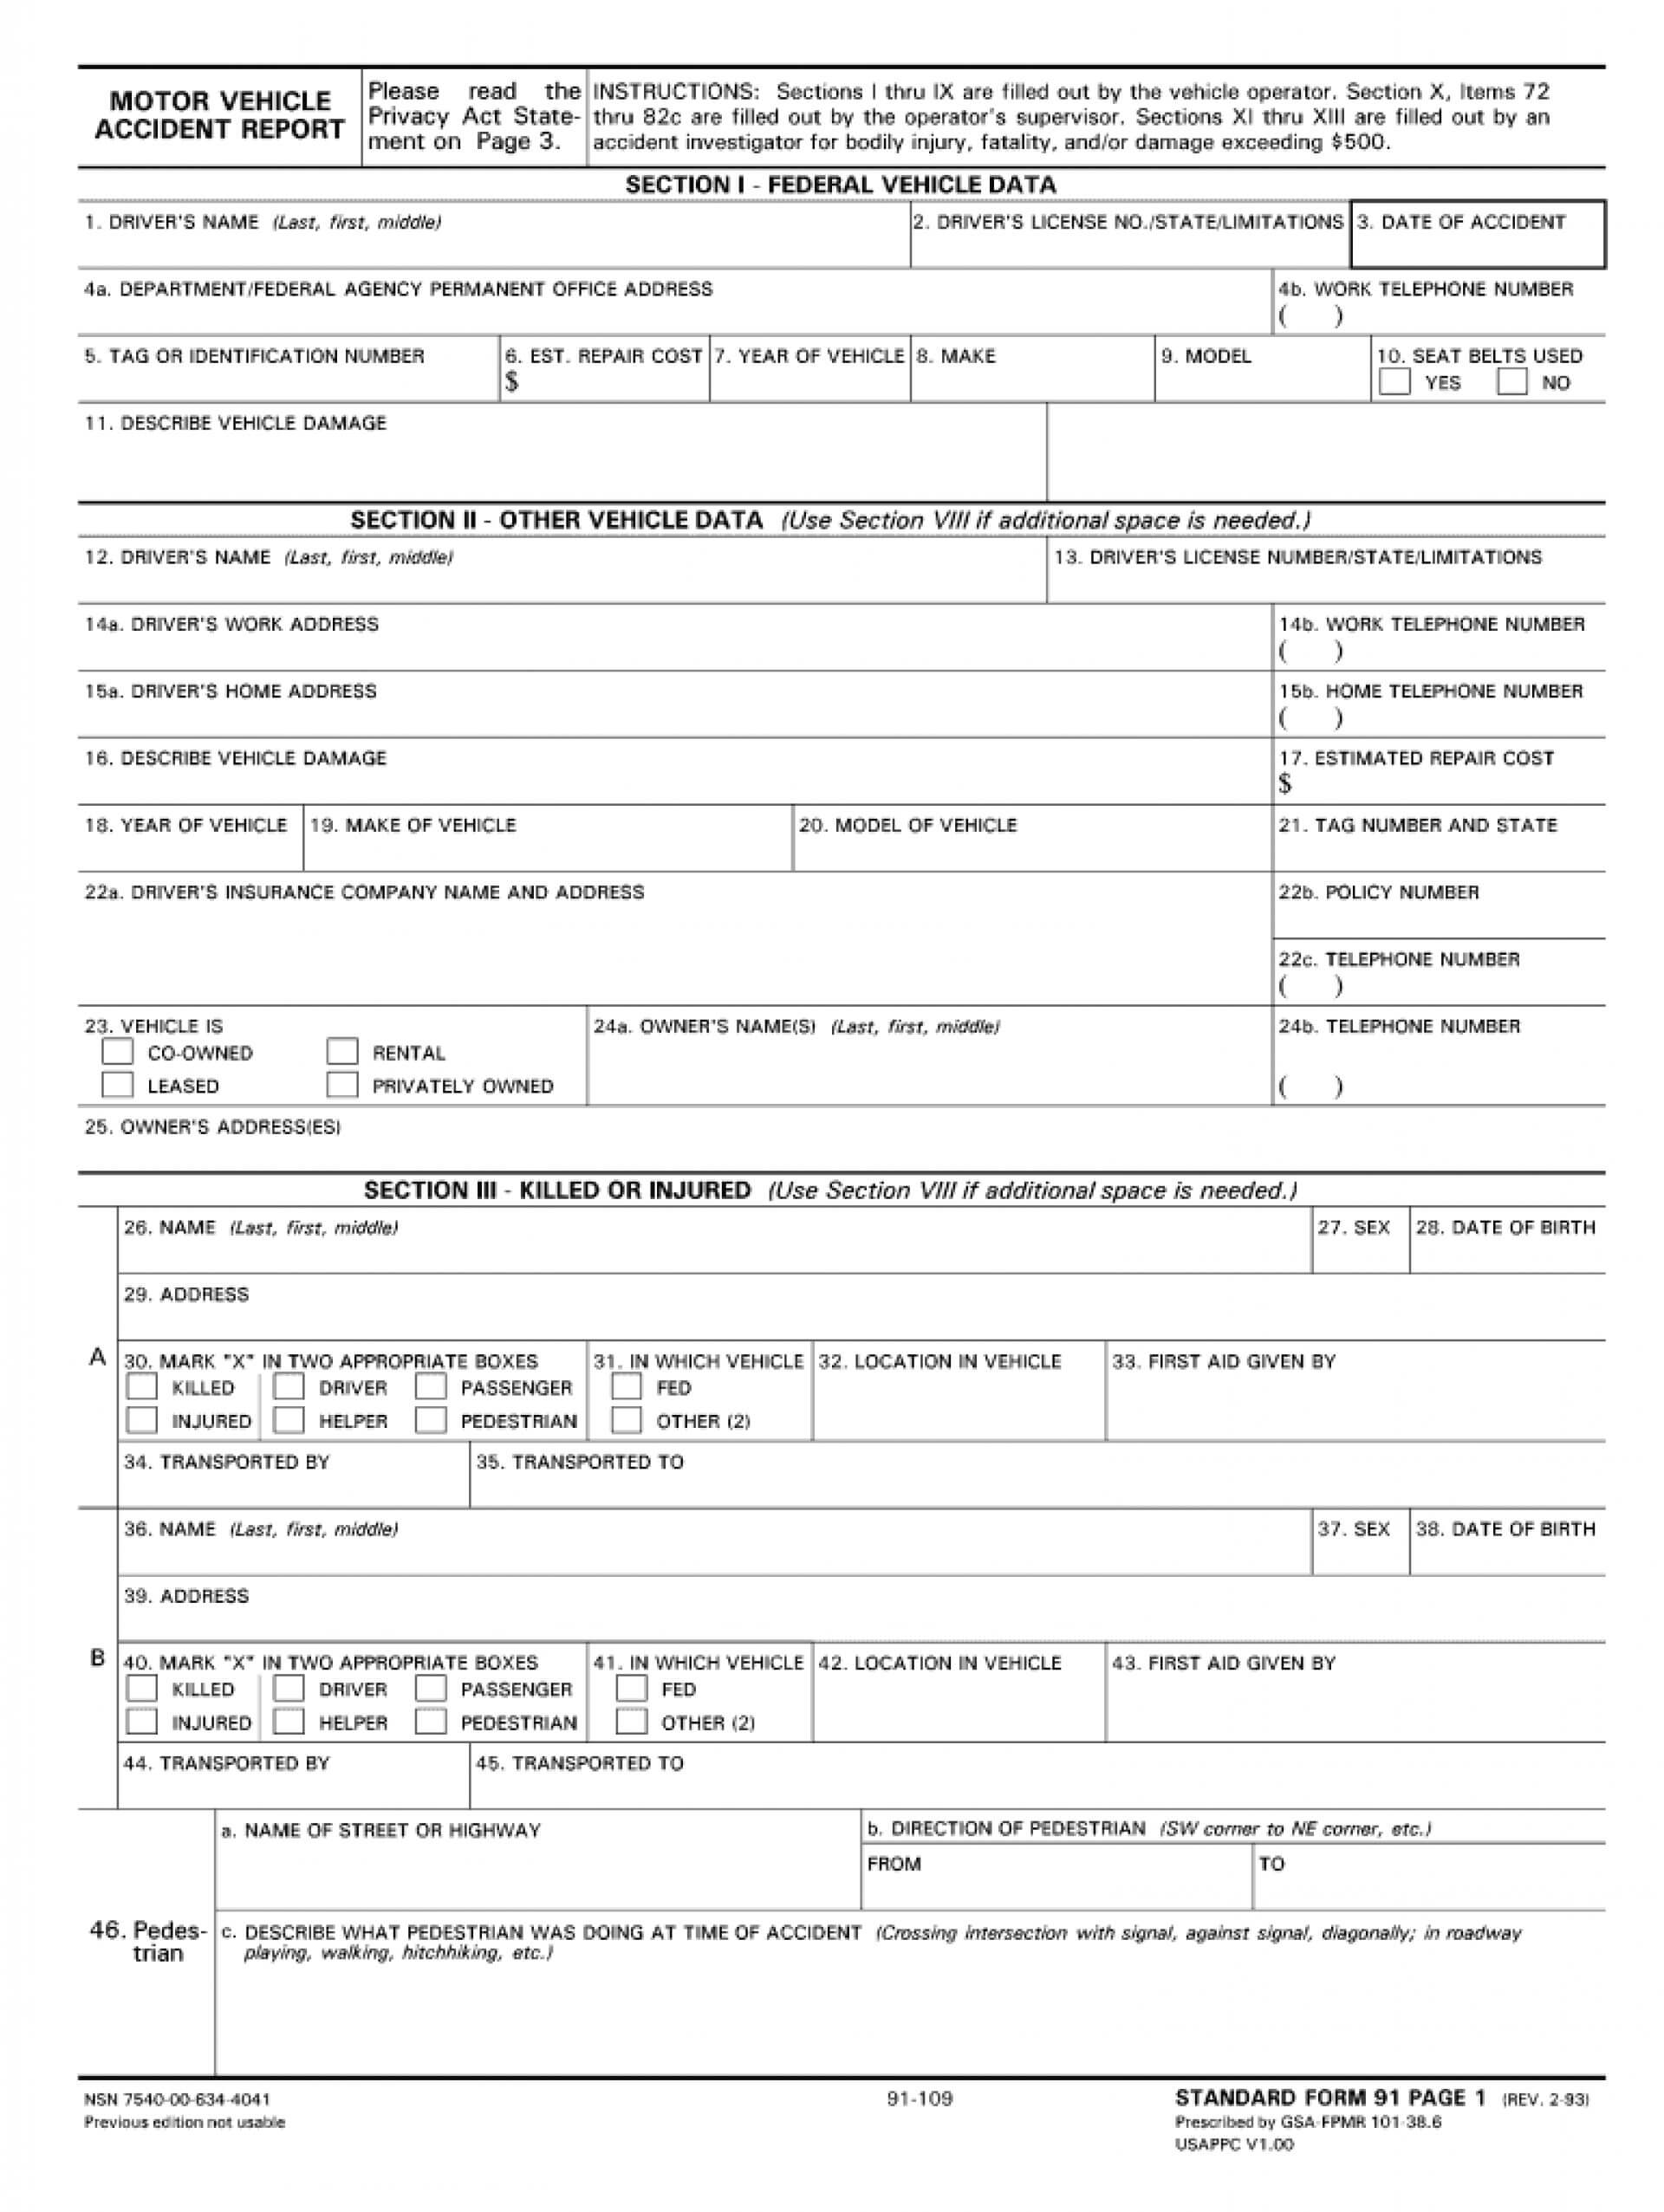 023 Fake Police Report Template Free Accident Unique In Fake Police Report Template